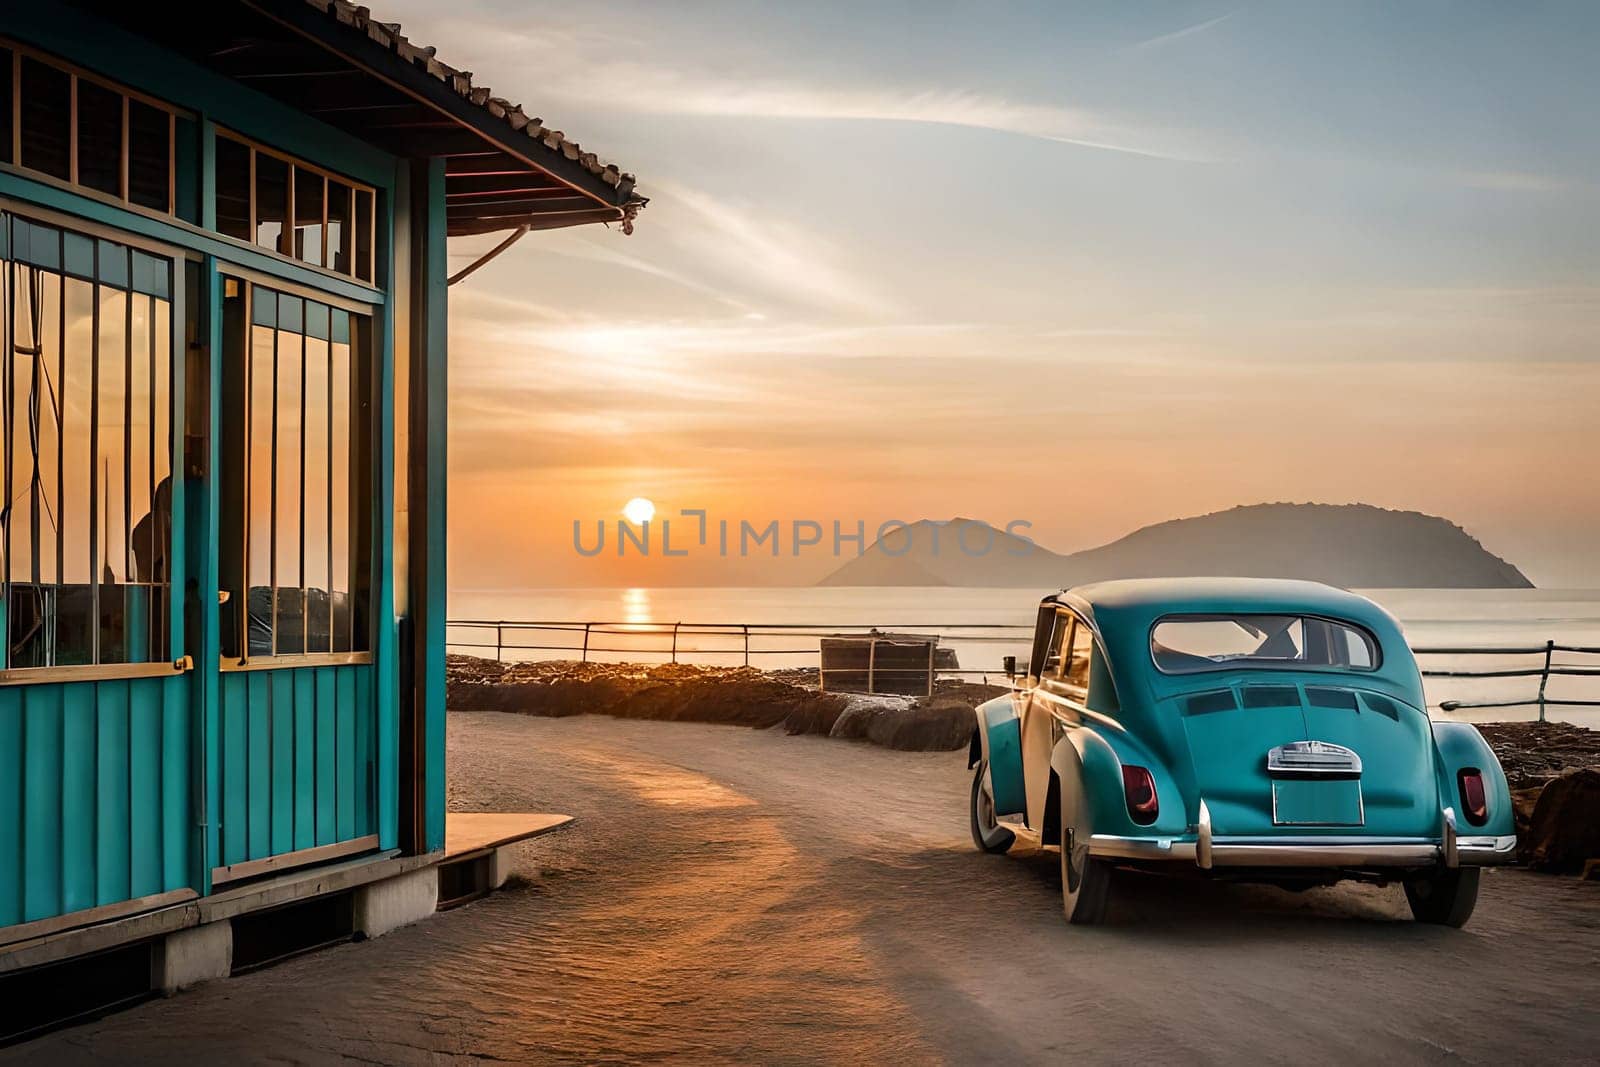 A blue car parked on a beach with a beach house in the background. A vintage car on a country road with a sunset in the background AI-generated Digital Art